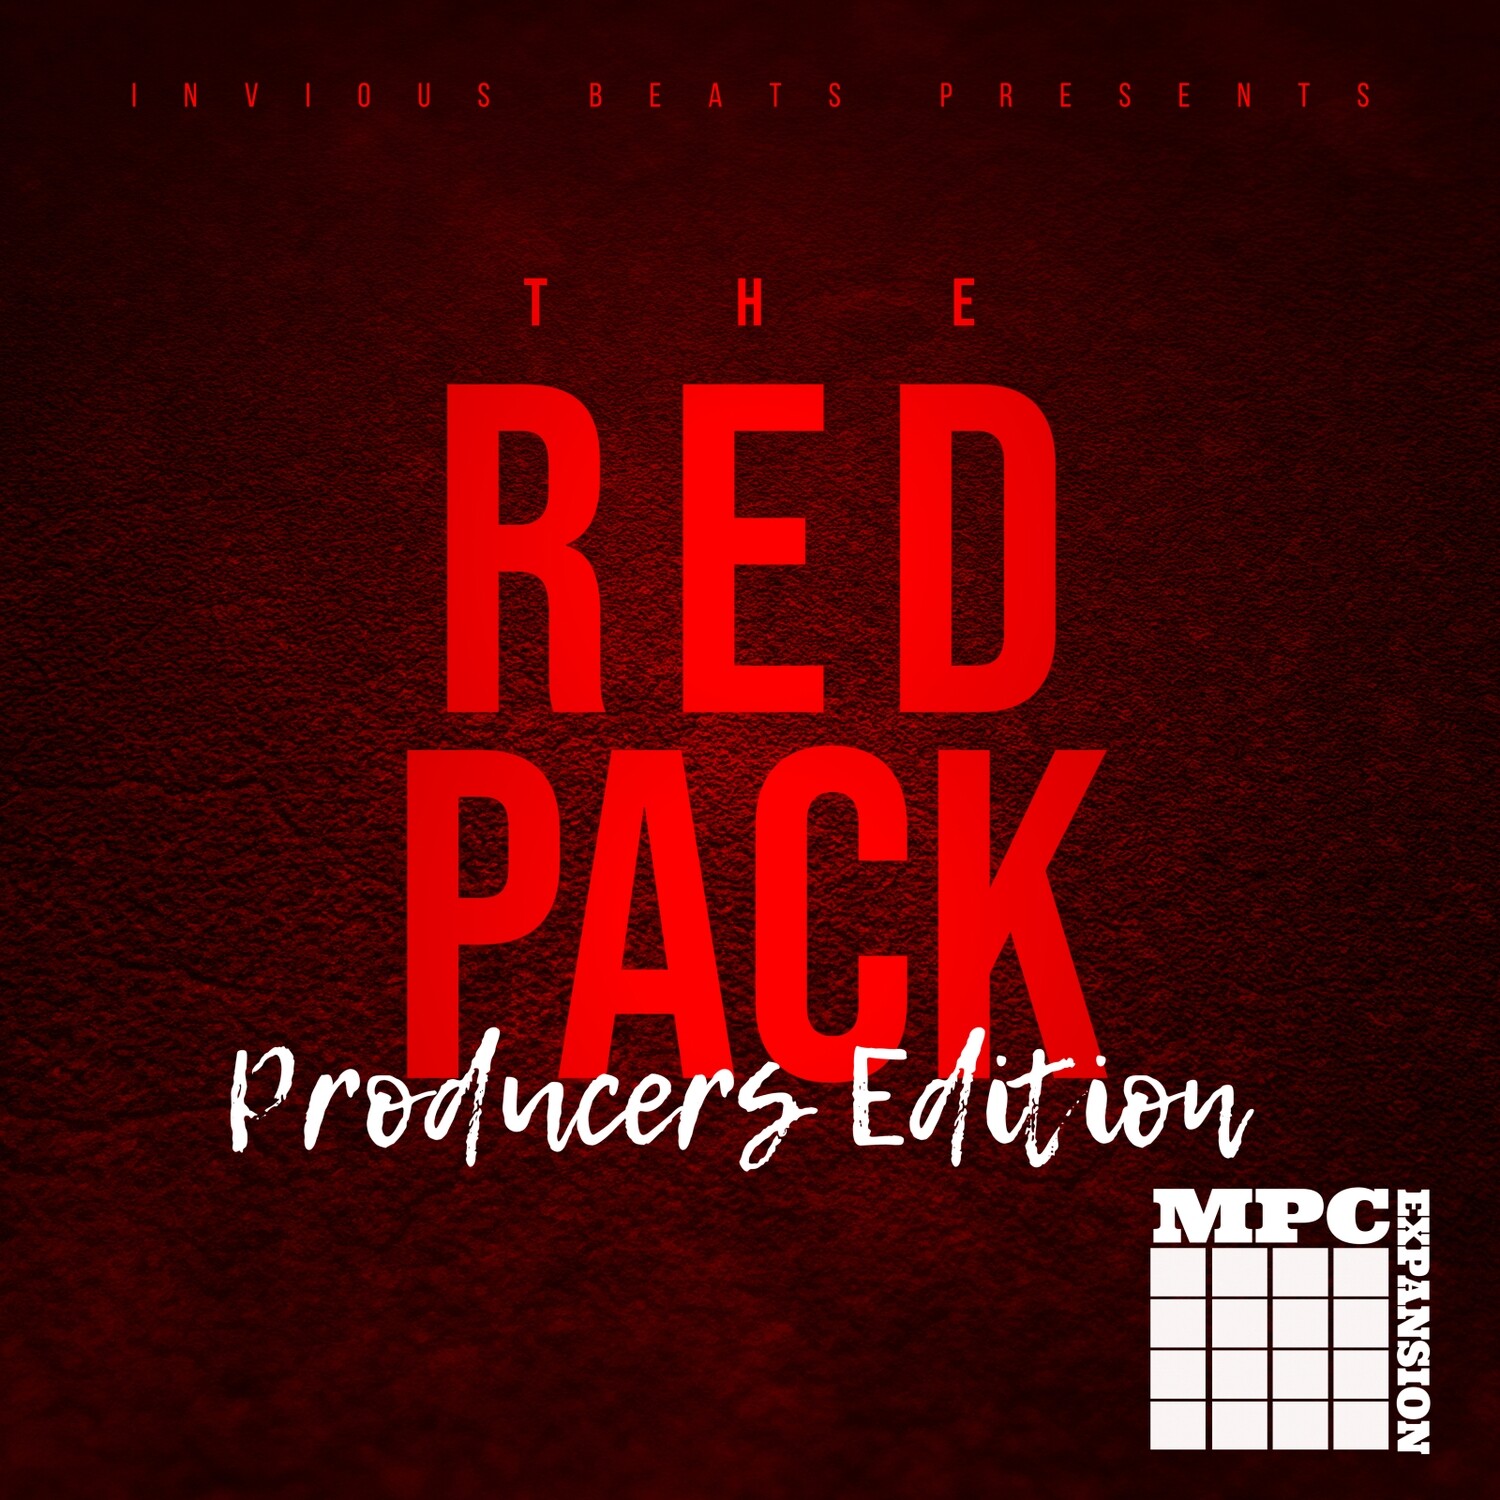 MPC EXPANSION "THE RED PACK" by INVIOUS